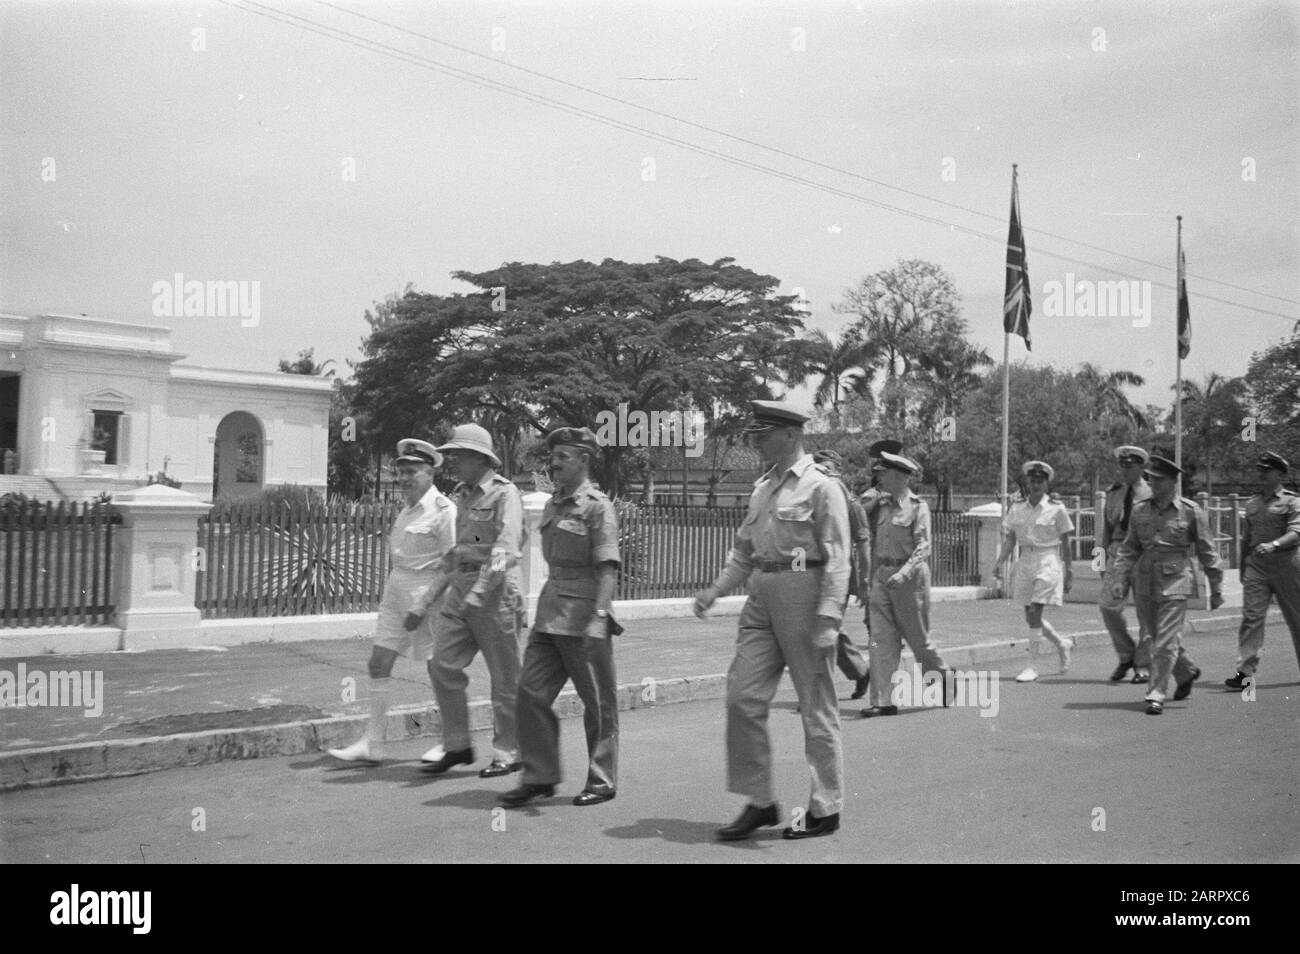 Celebrations in the transfer and withdrawal of British troops from Indonesia  Vlnr. Vice Admiral Pinke, Governor Van Mook, Brigade-General Lauder, Army Commander General Rail Date: 22 November 1946 Location: Batavia, Indonesia, Jakarta, Dutch East Indies Stock Photo